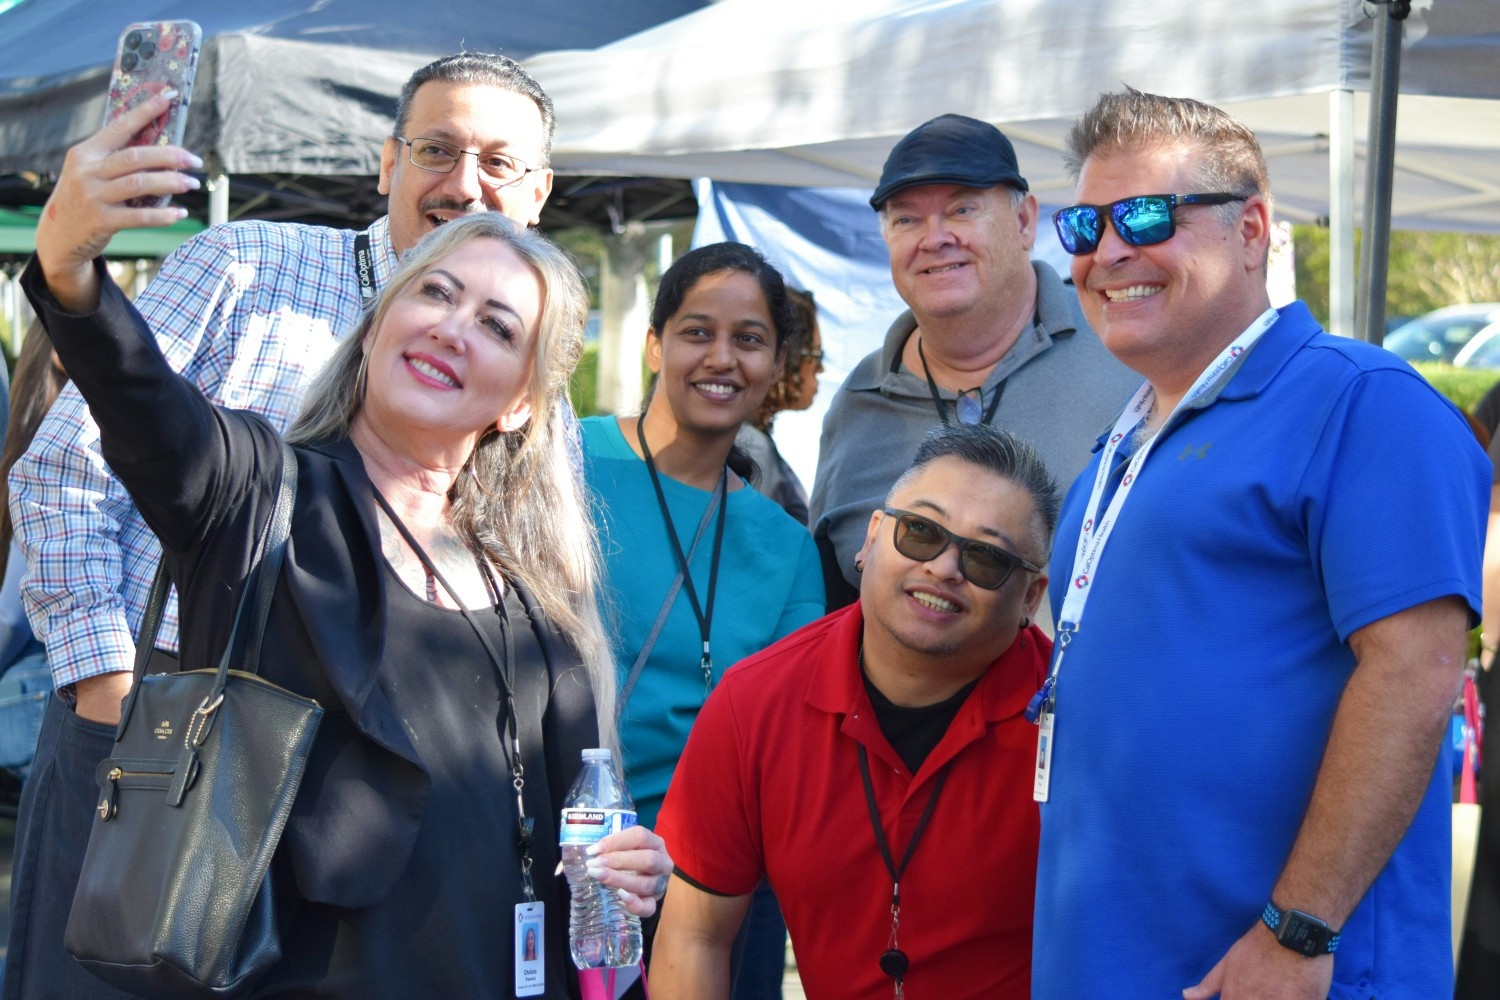 CalOptima Health's Customer Service Week is an annual event that encourages staff camaraderie and fun.